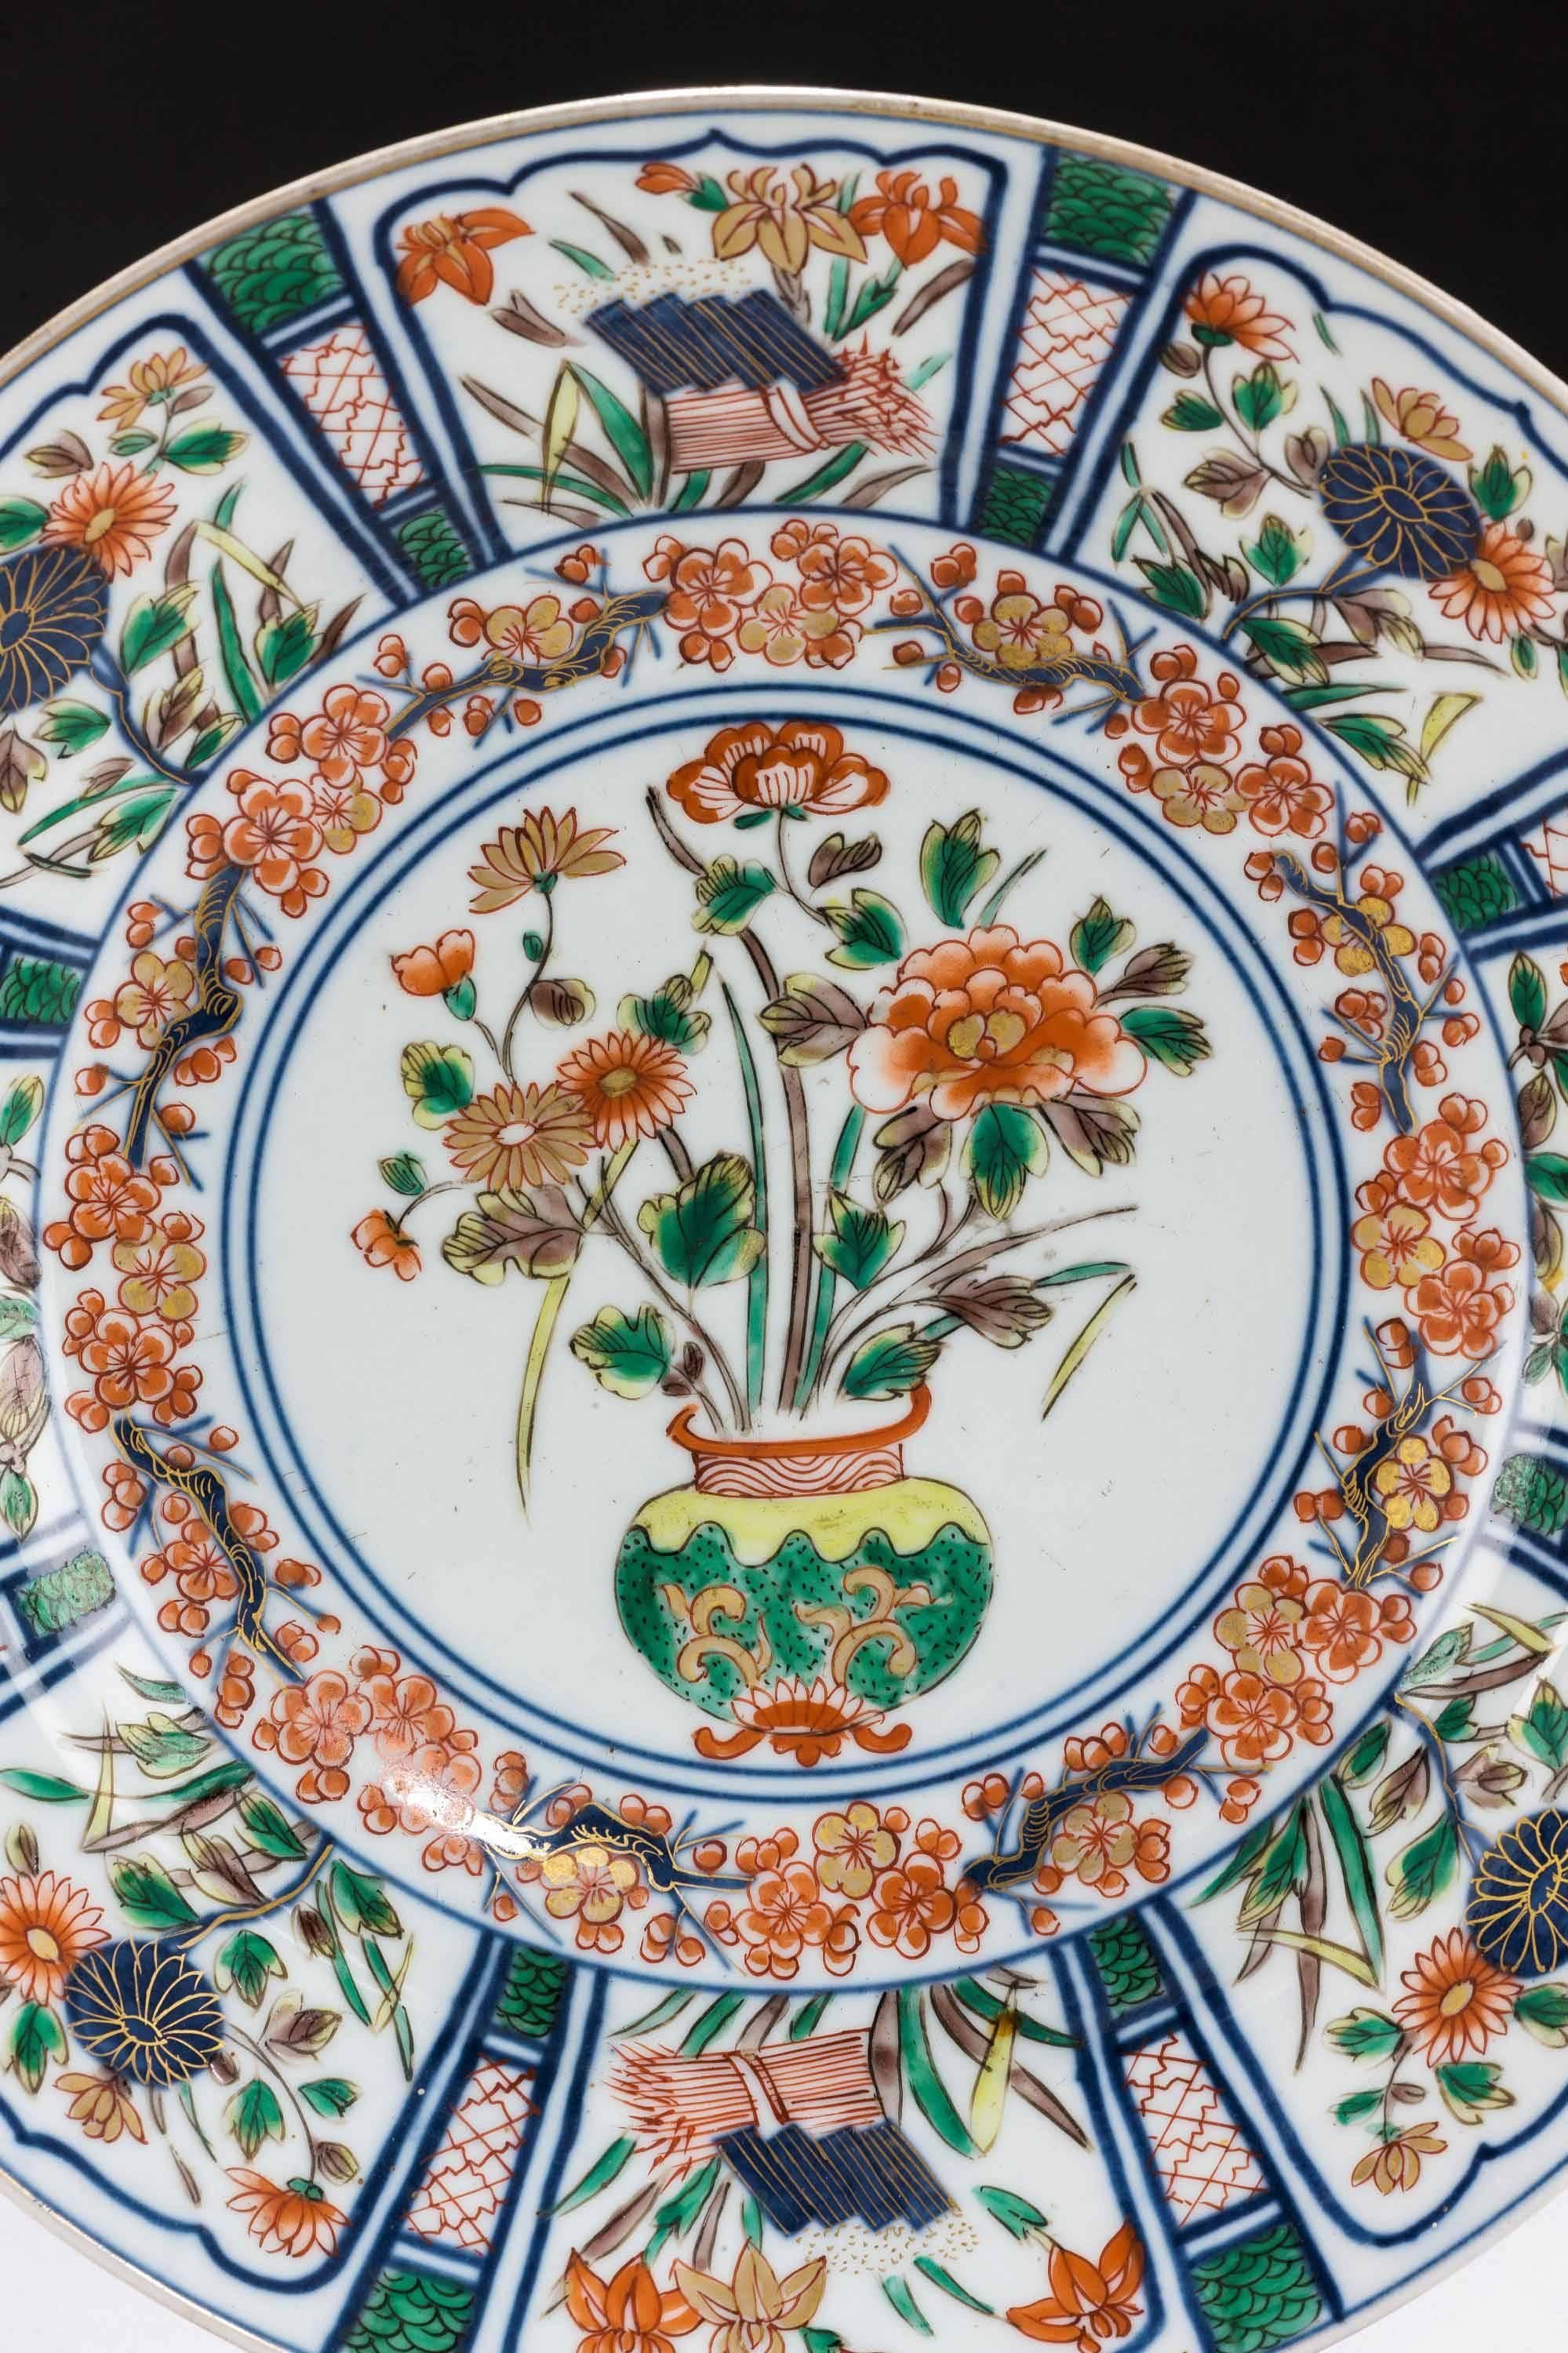 Second half 19th century Imari porcelain charger, with iris and peonies foliage. 

Imari began to be exported to Europe, because the Chinese kilns at Ching-te-Chen were damaged in the political chaos and the new Qing dynasty government stopped trade